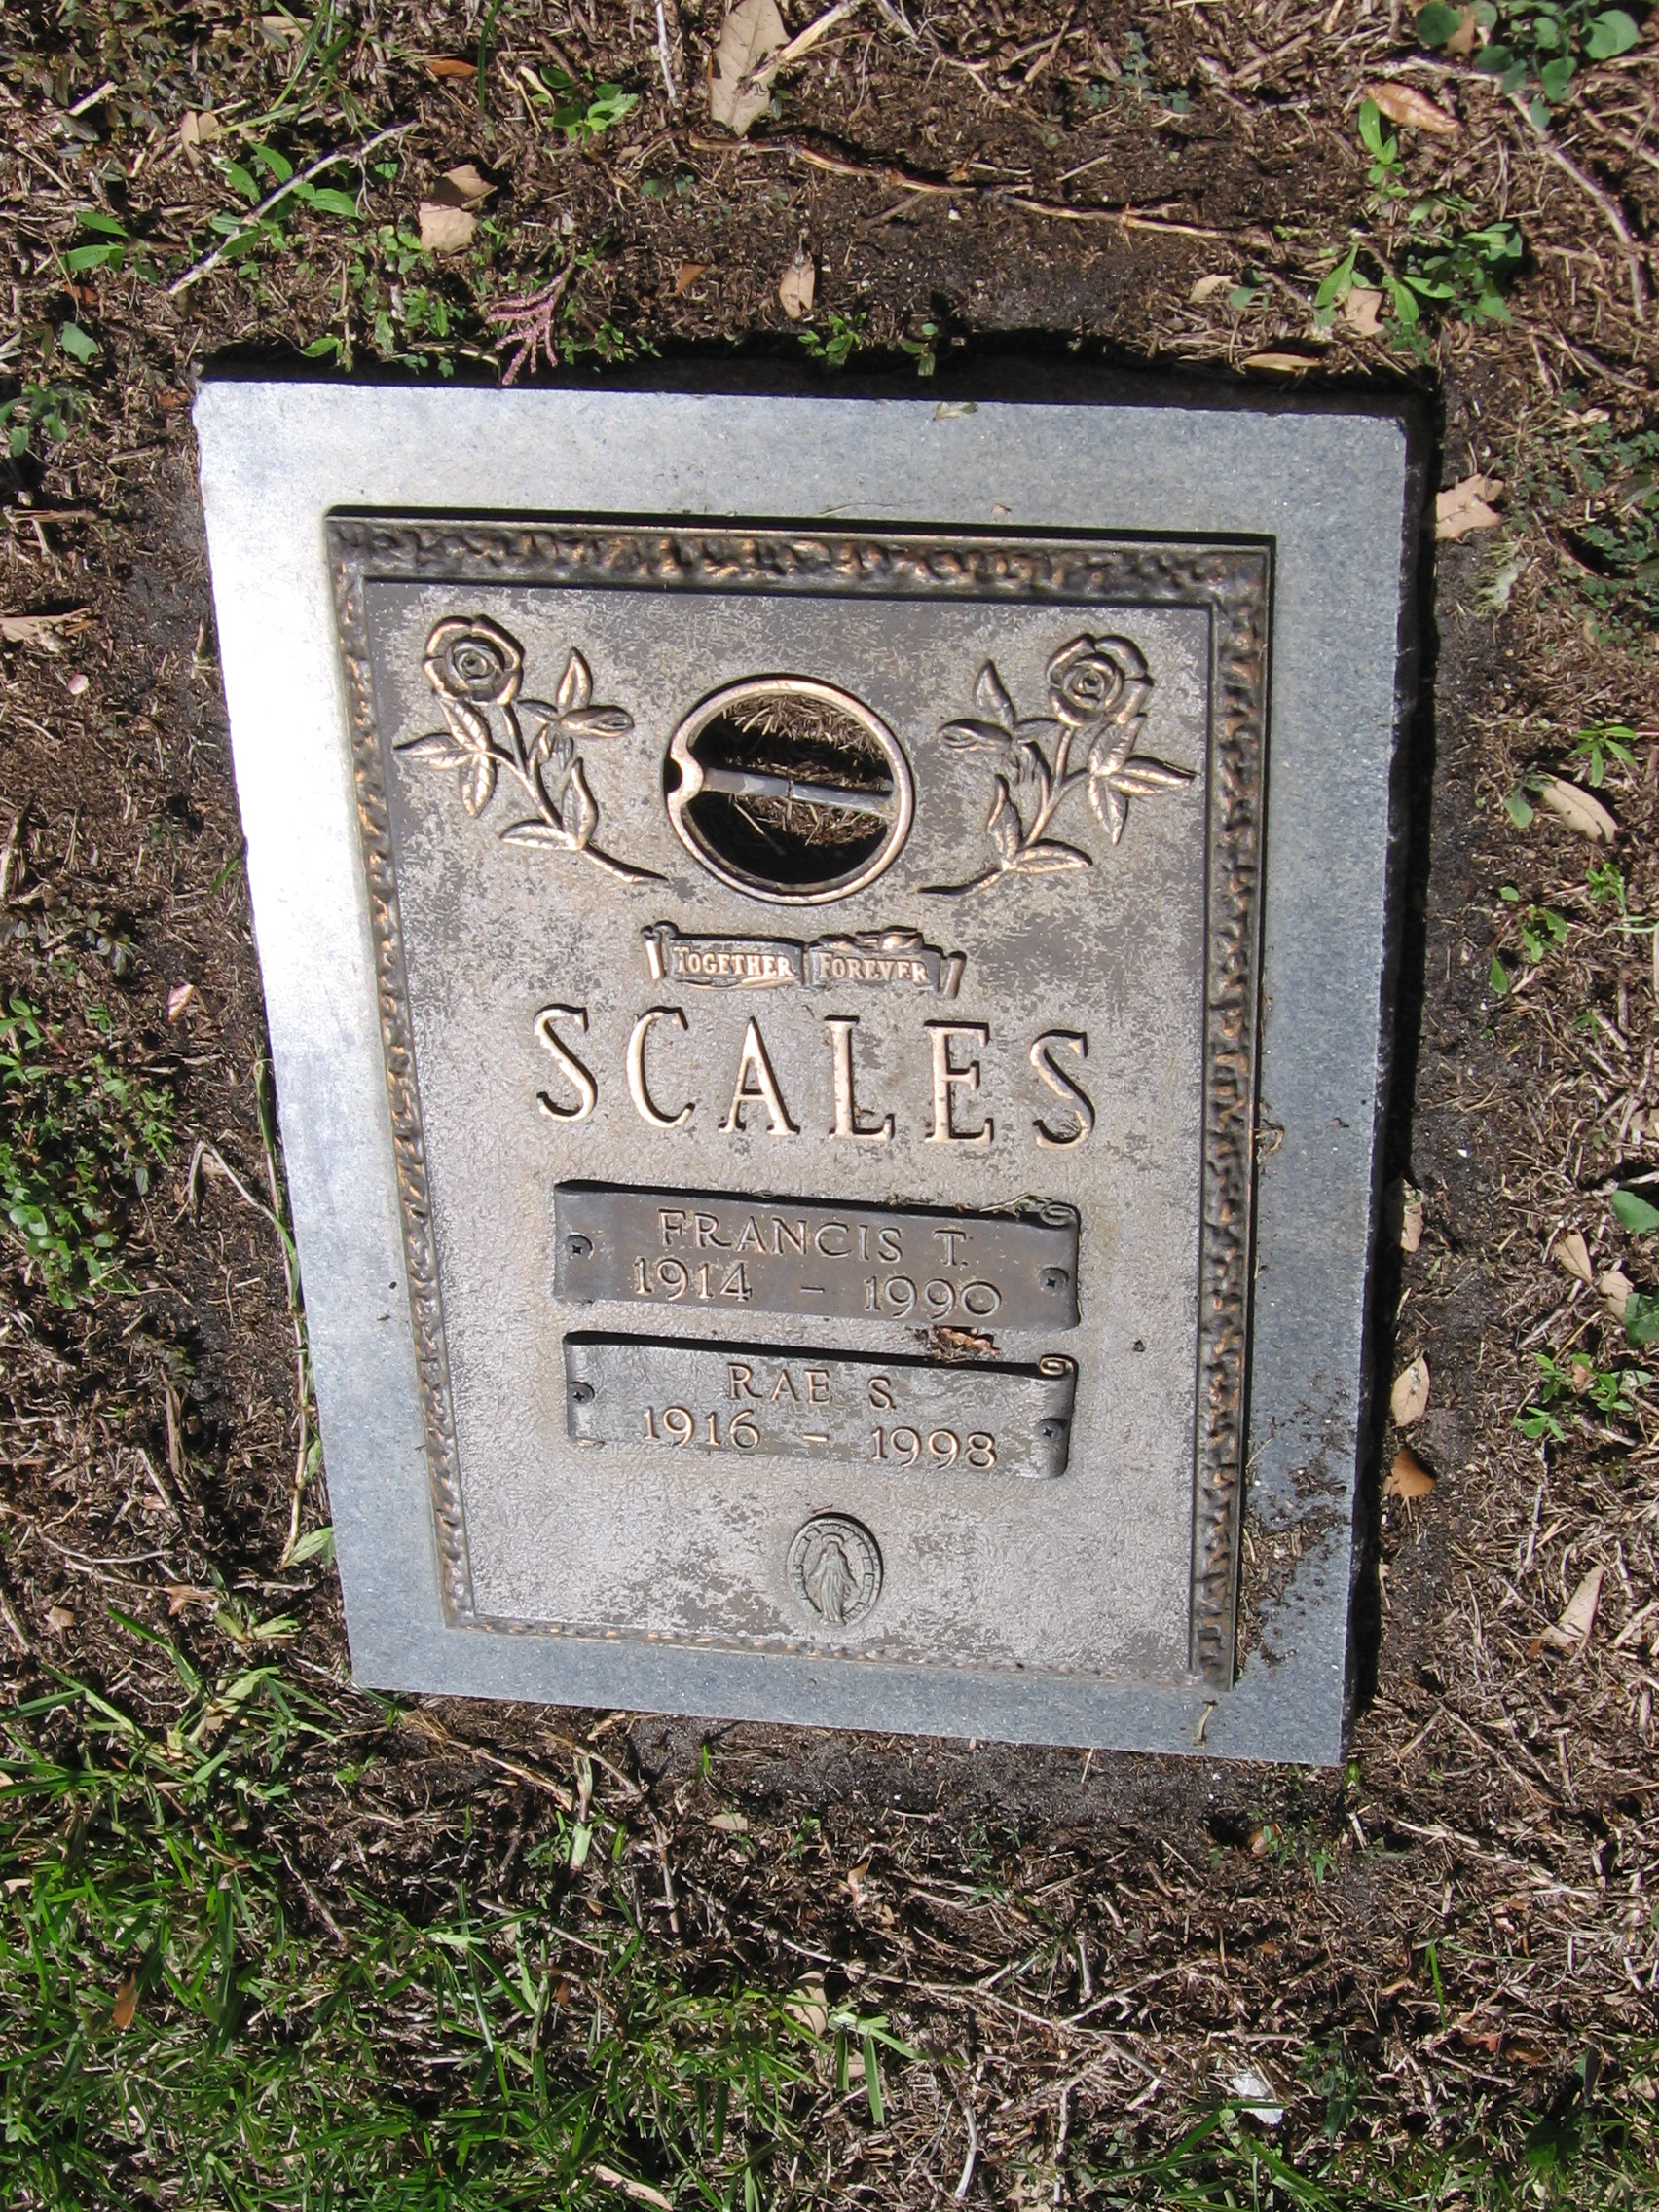 Rae S Scales